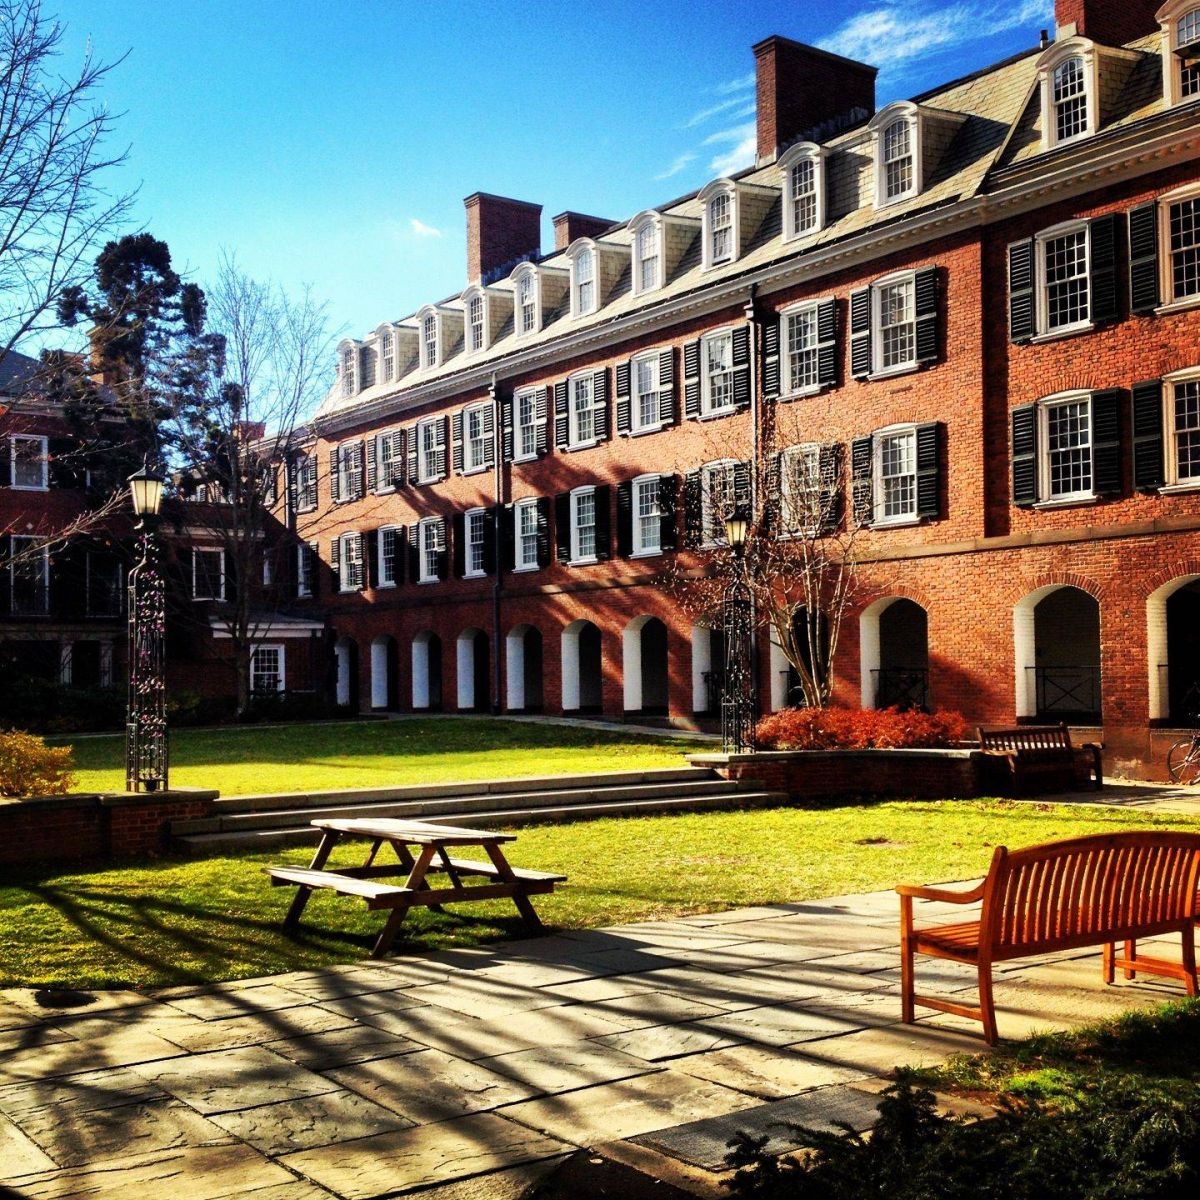 The Timothy Dwight College courtyard.